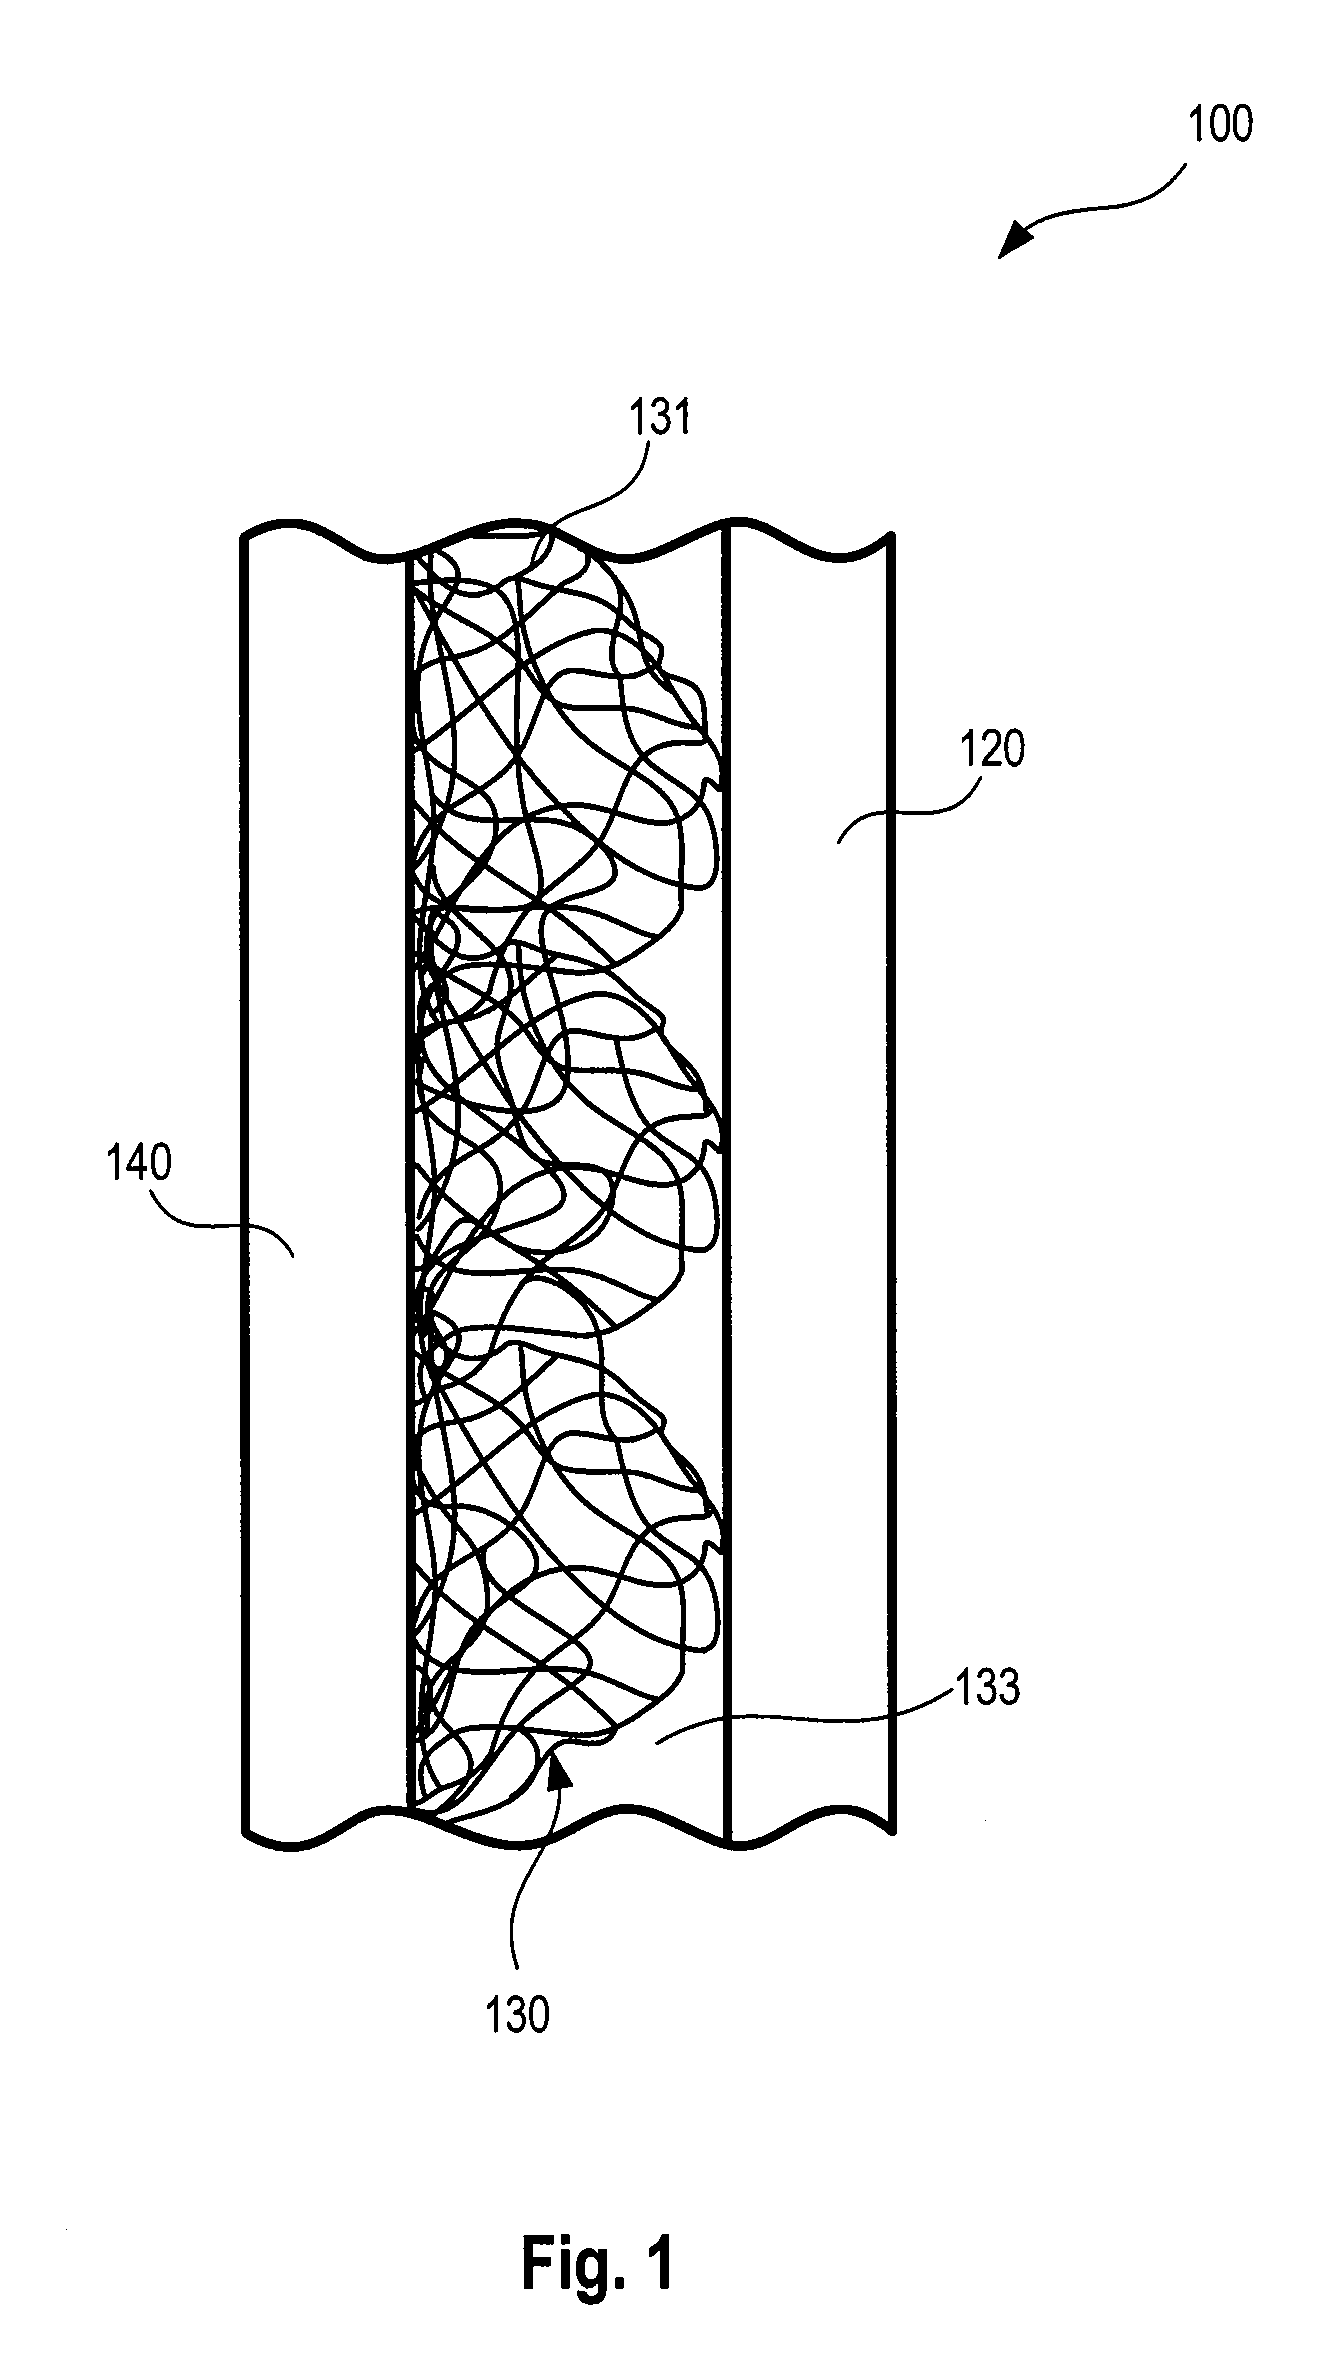 Multilayer laminate system and method used within building structures